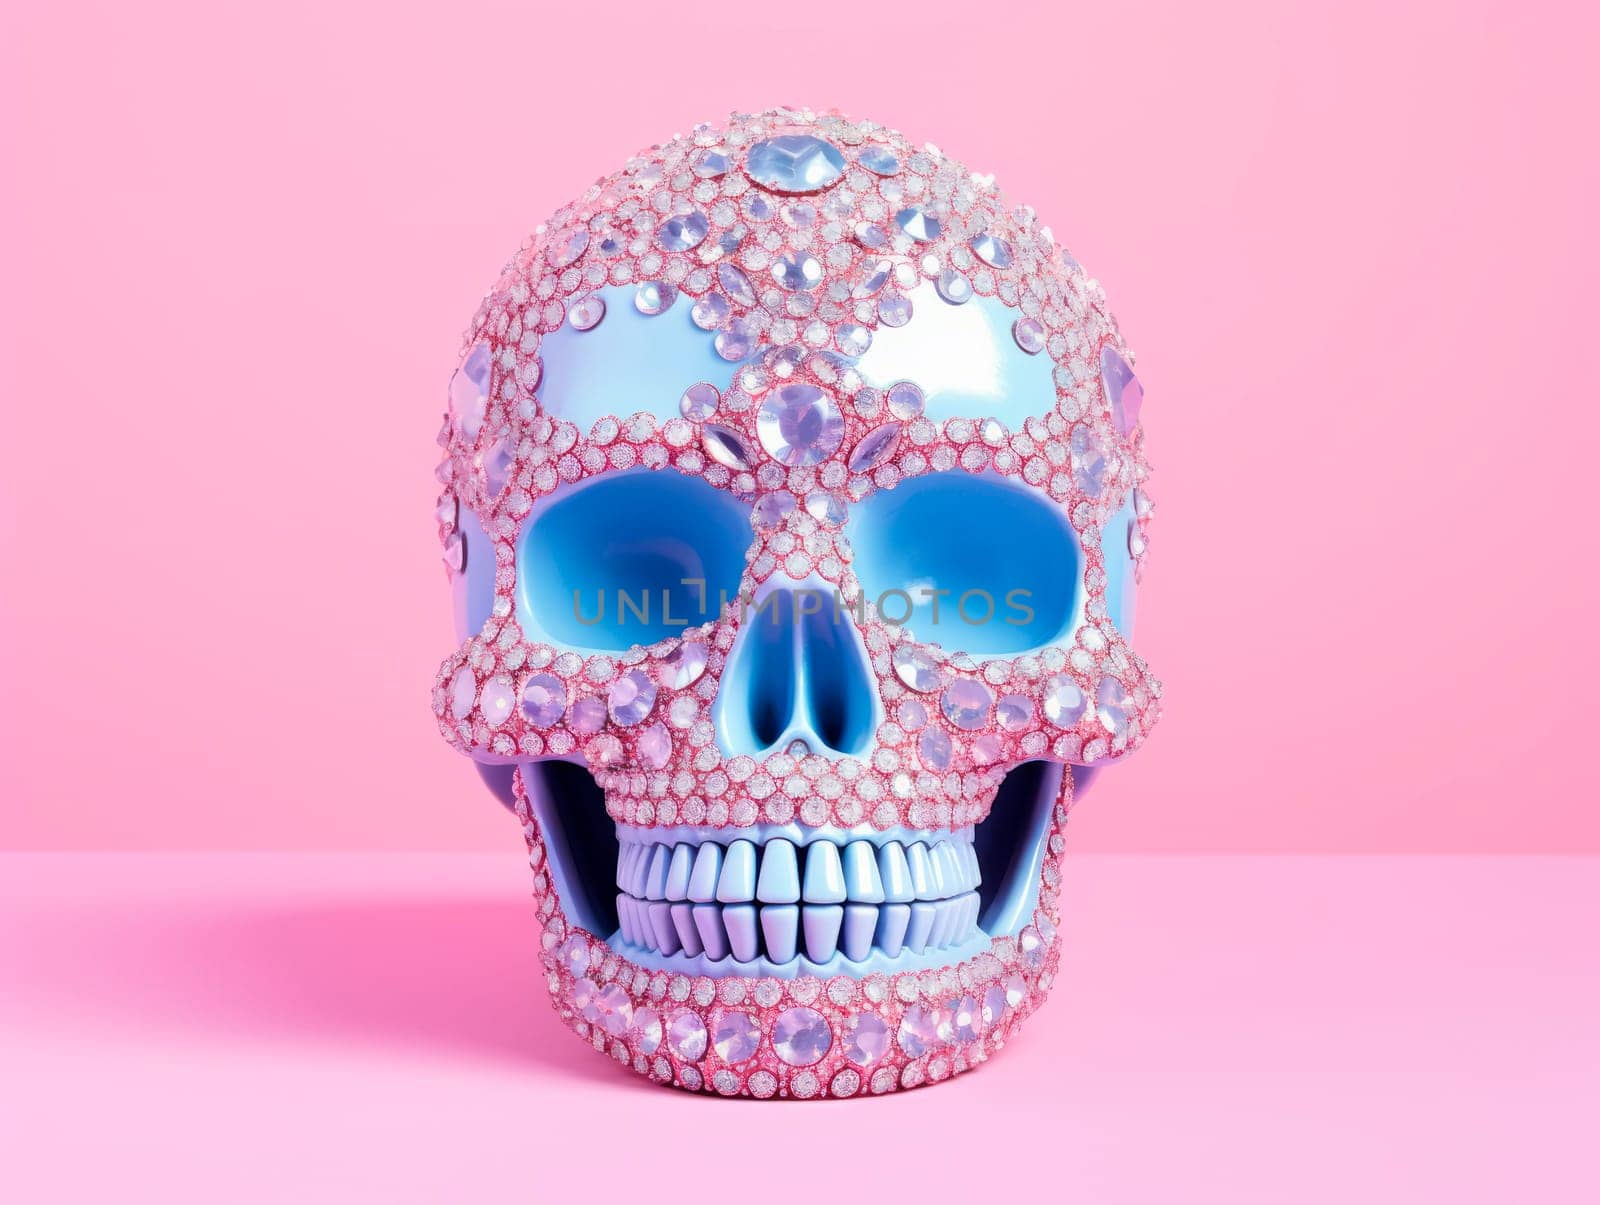 A skull decorated with shiny rhinestones on a bright background by Spirina